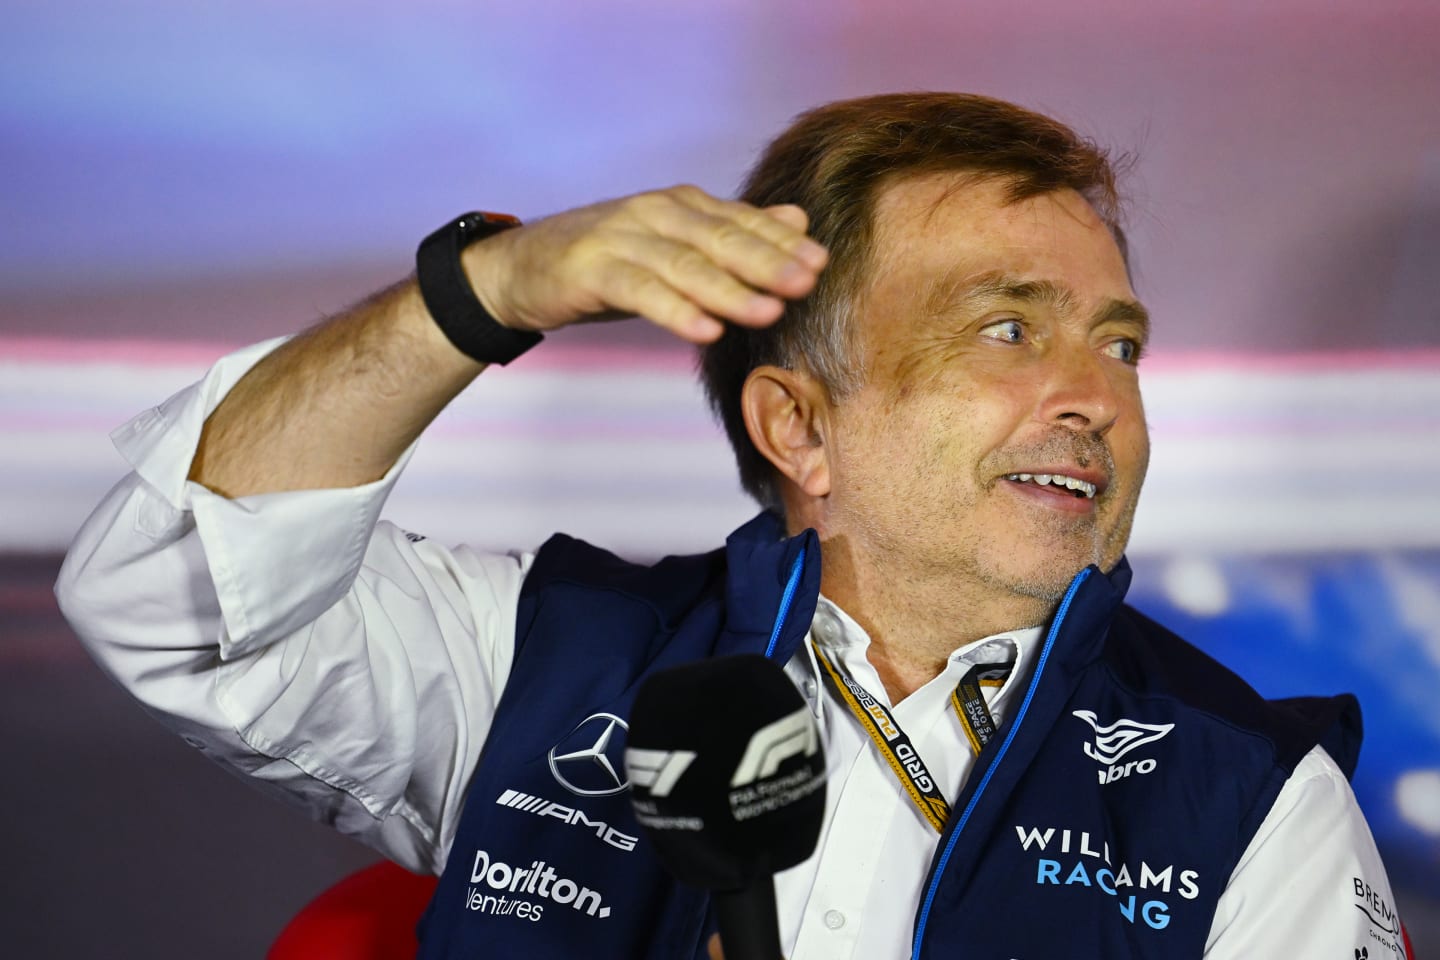 ZANDVOORT, NETHERLANDS - SEPTEMBER 03: Jost Capito, CEO of Williams F1 attends the Team Principals Press Conference prior to final practice ahead of the F1 Grand Prix of The Netherlands at Circuit Zandvoort on September 03, 2022 in Zandvoort, Netherlands. (Photo by Clive Mason/Getty Images)